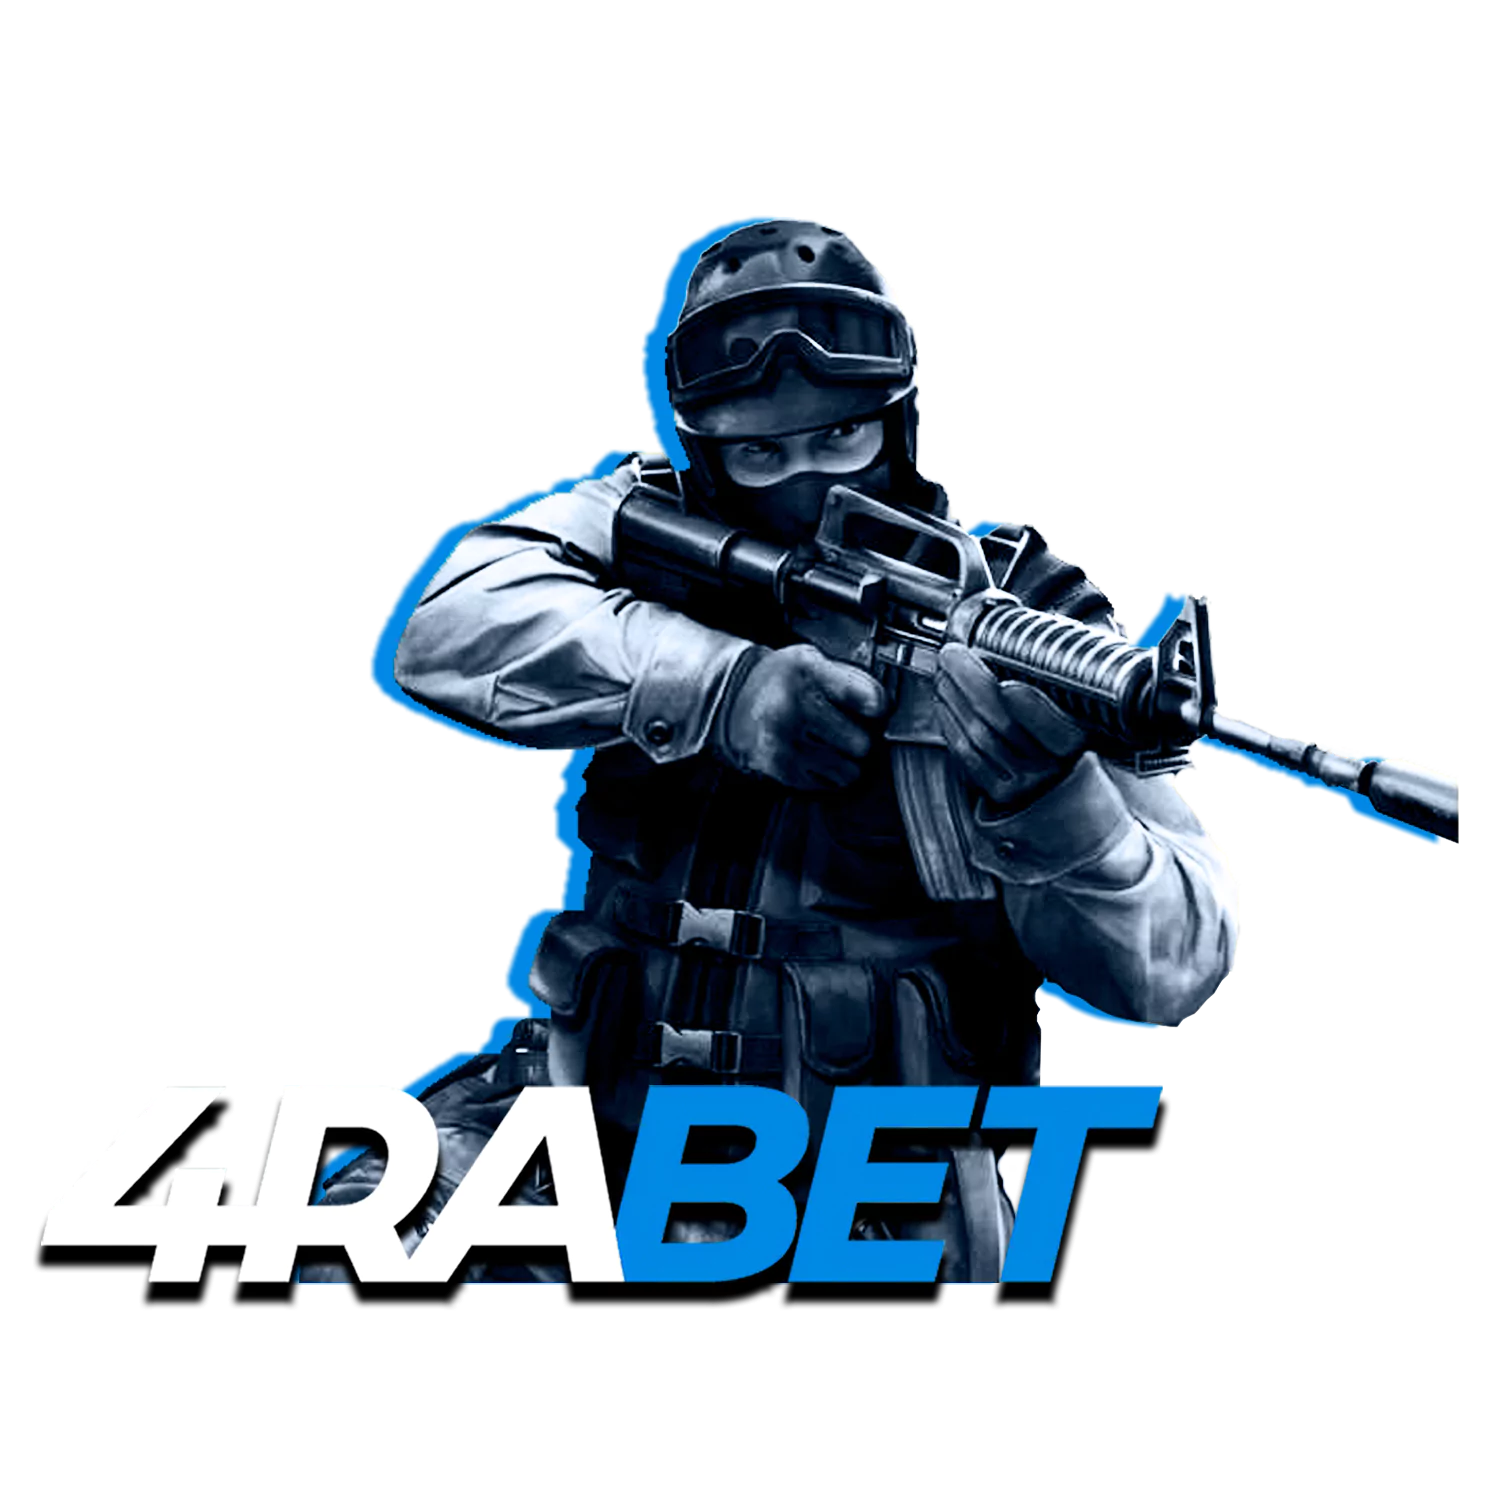 Learn how to bet on the CS:GO matches in the 4rabet account.